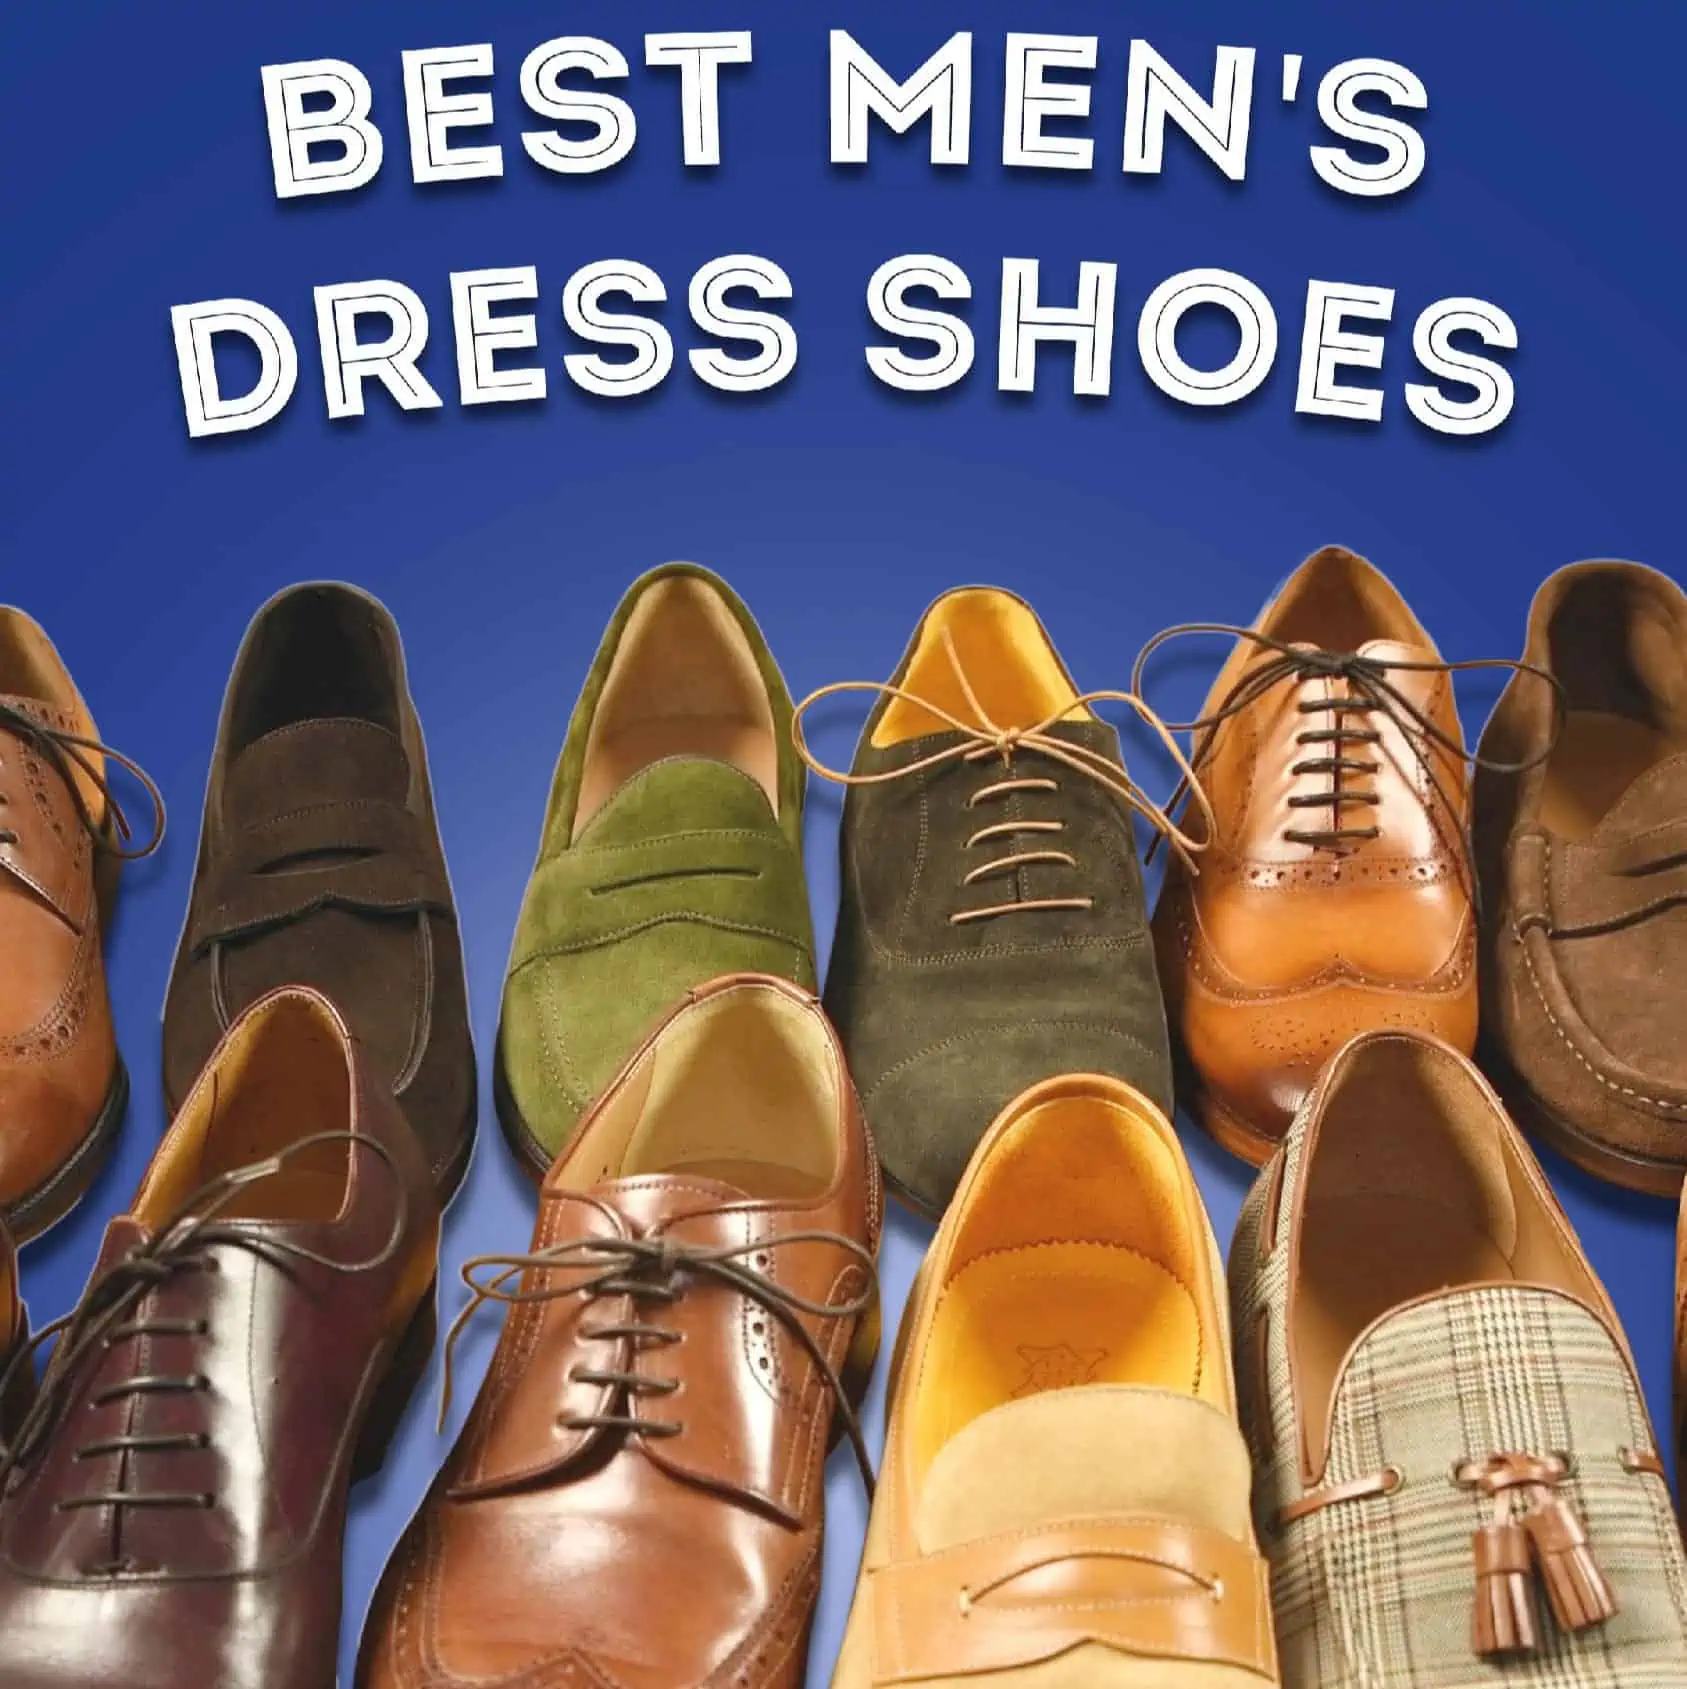 Oxford Shoes Guide - Wearing, Buying, & What To Avoid